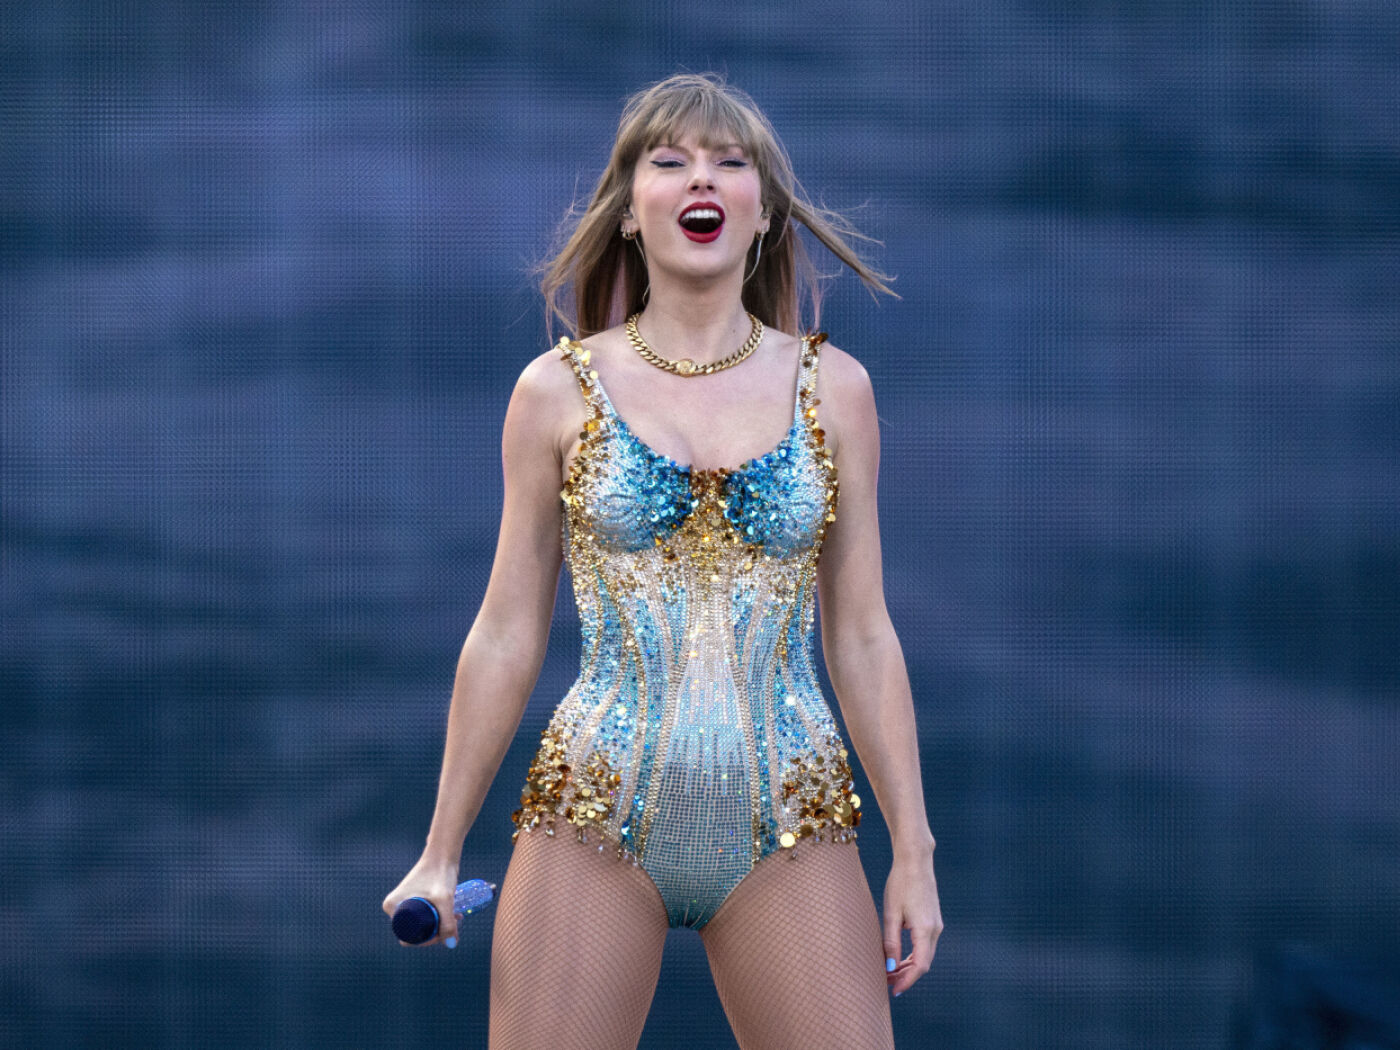 The phenomenon Taylor Swift performs in Switzerland for the first time